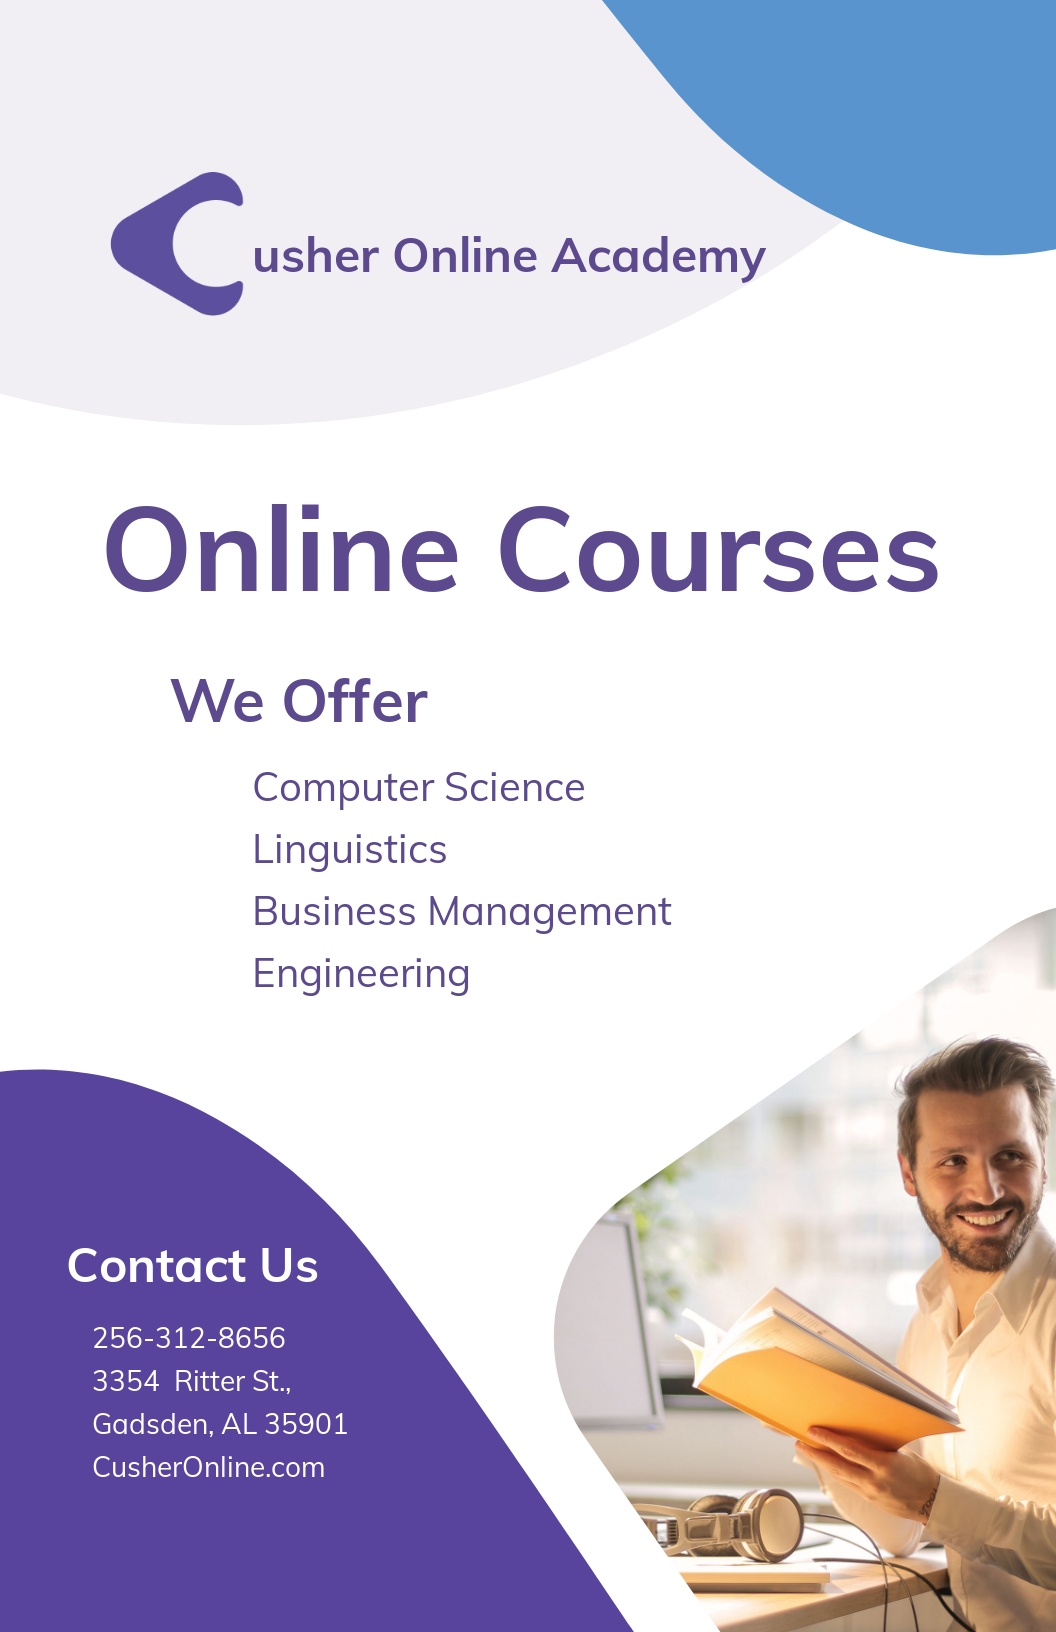 Online Courses Poster Template - Illustrator, InDesign, Word, Apple Pages, PSD, Publisher